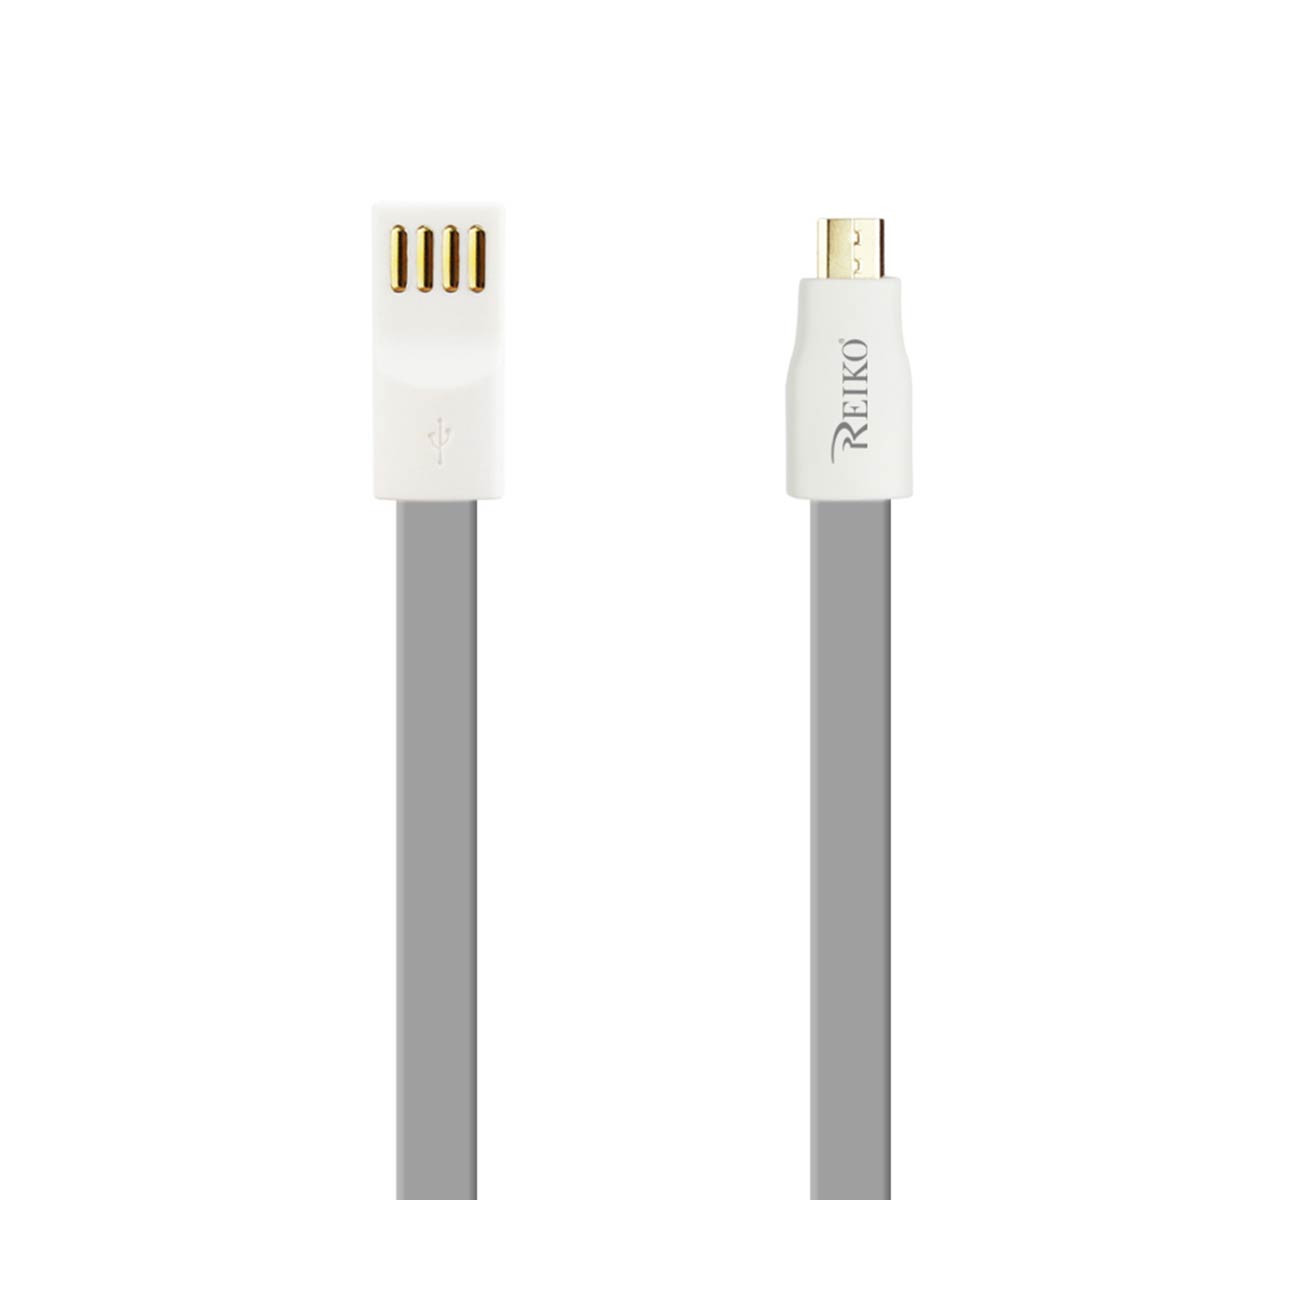 Data Cable USB Flat Micro Gold Plated 3.9Ft With Cable Tie Gray Color